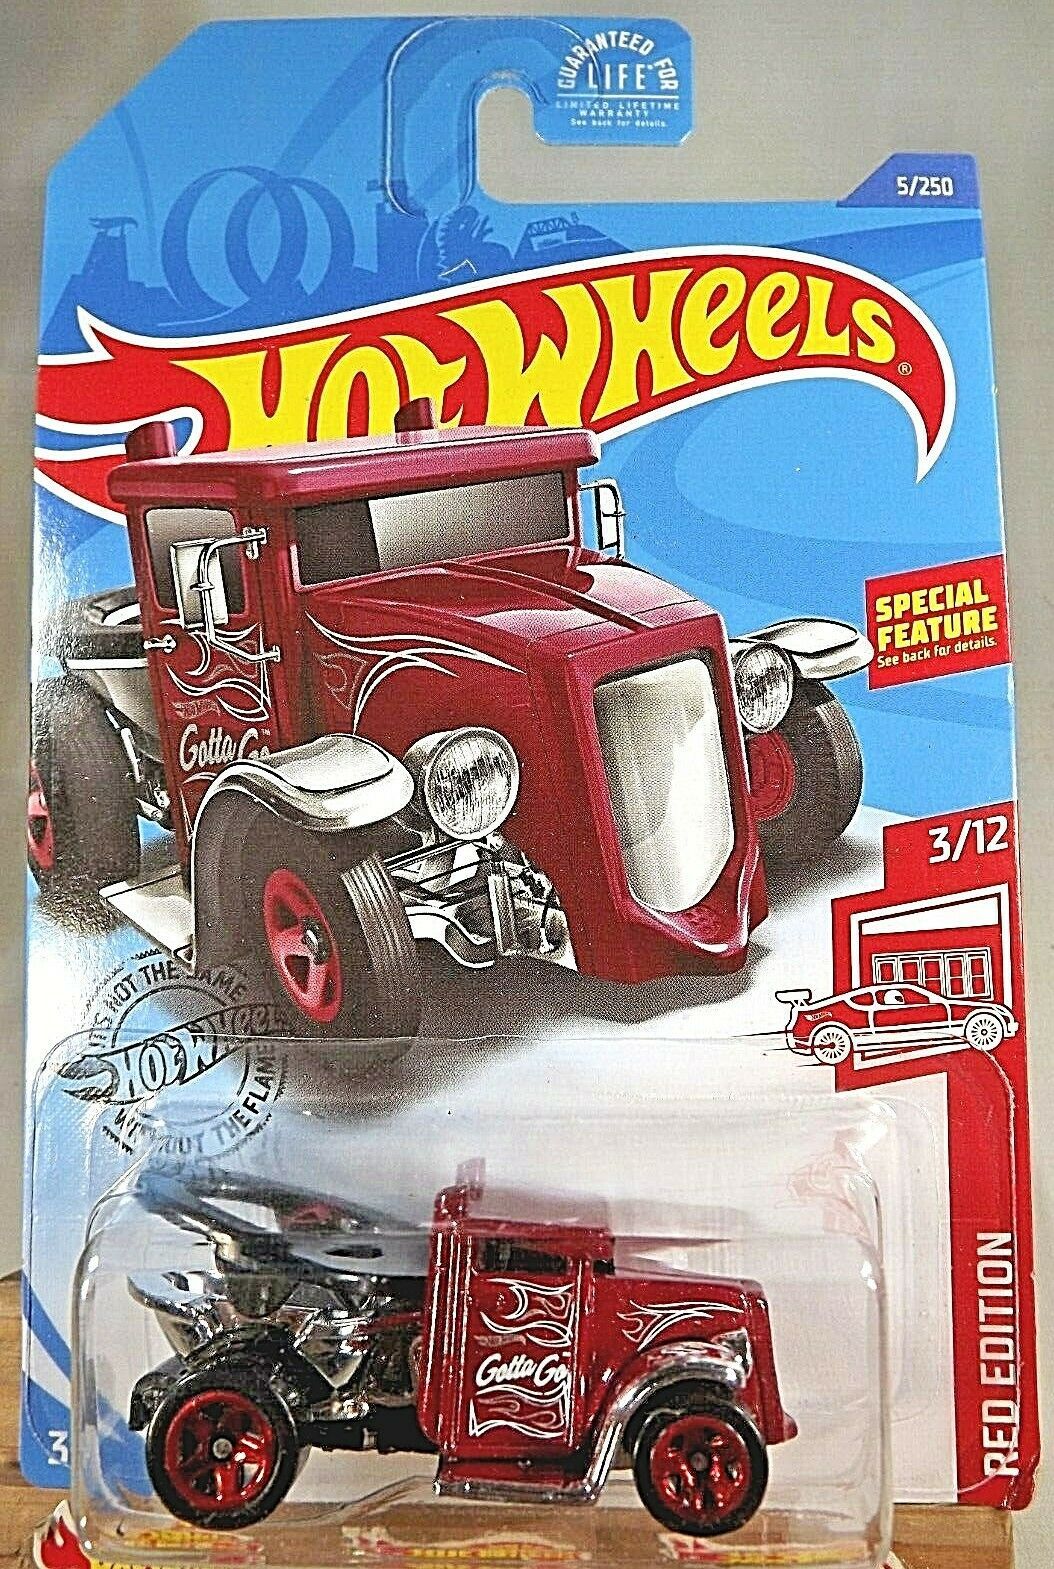 2020 Hot Wheels Target Exclusive 5 Red Edition 3/12 GOTTA GO Red